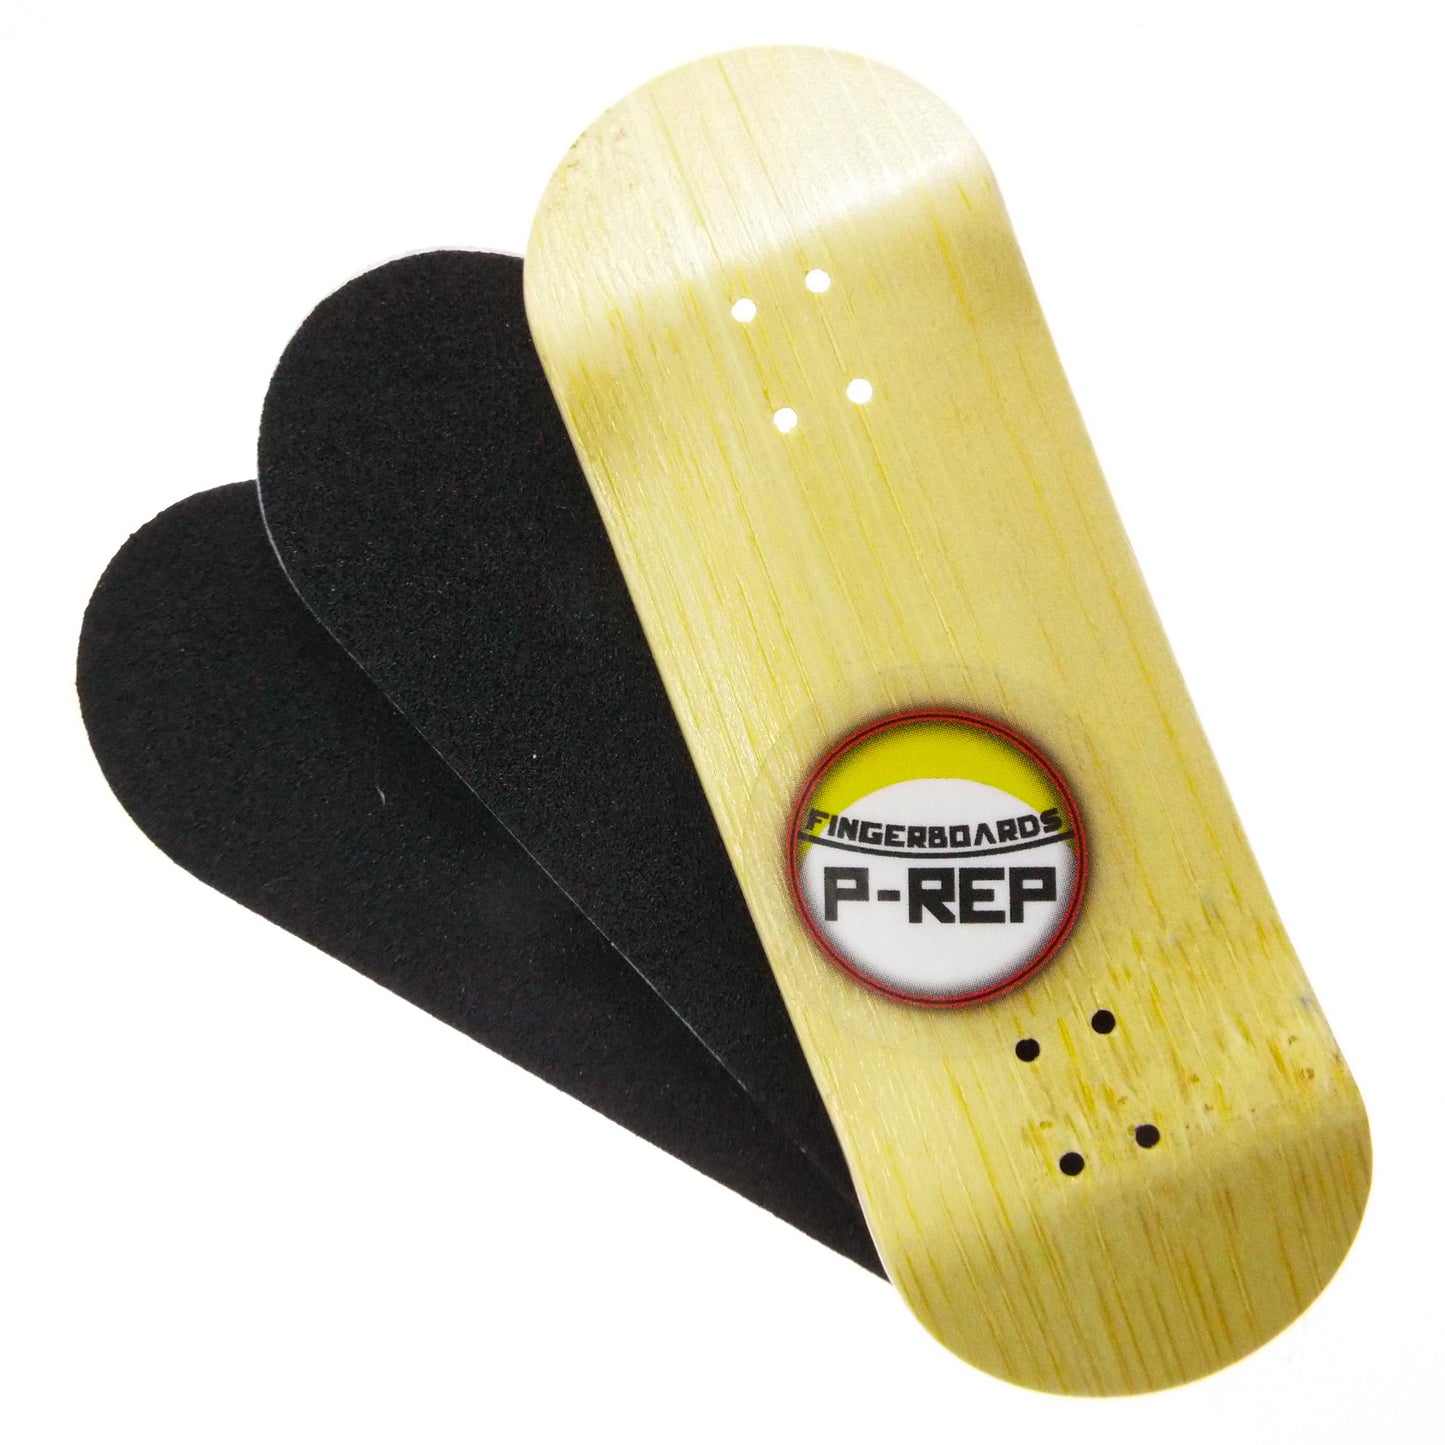 P-REP  32mm x 97mm V2 Standard Complete - Bamboo